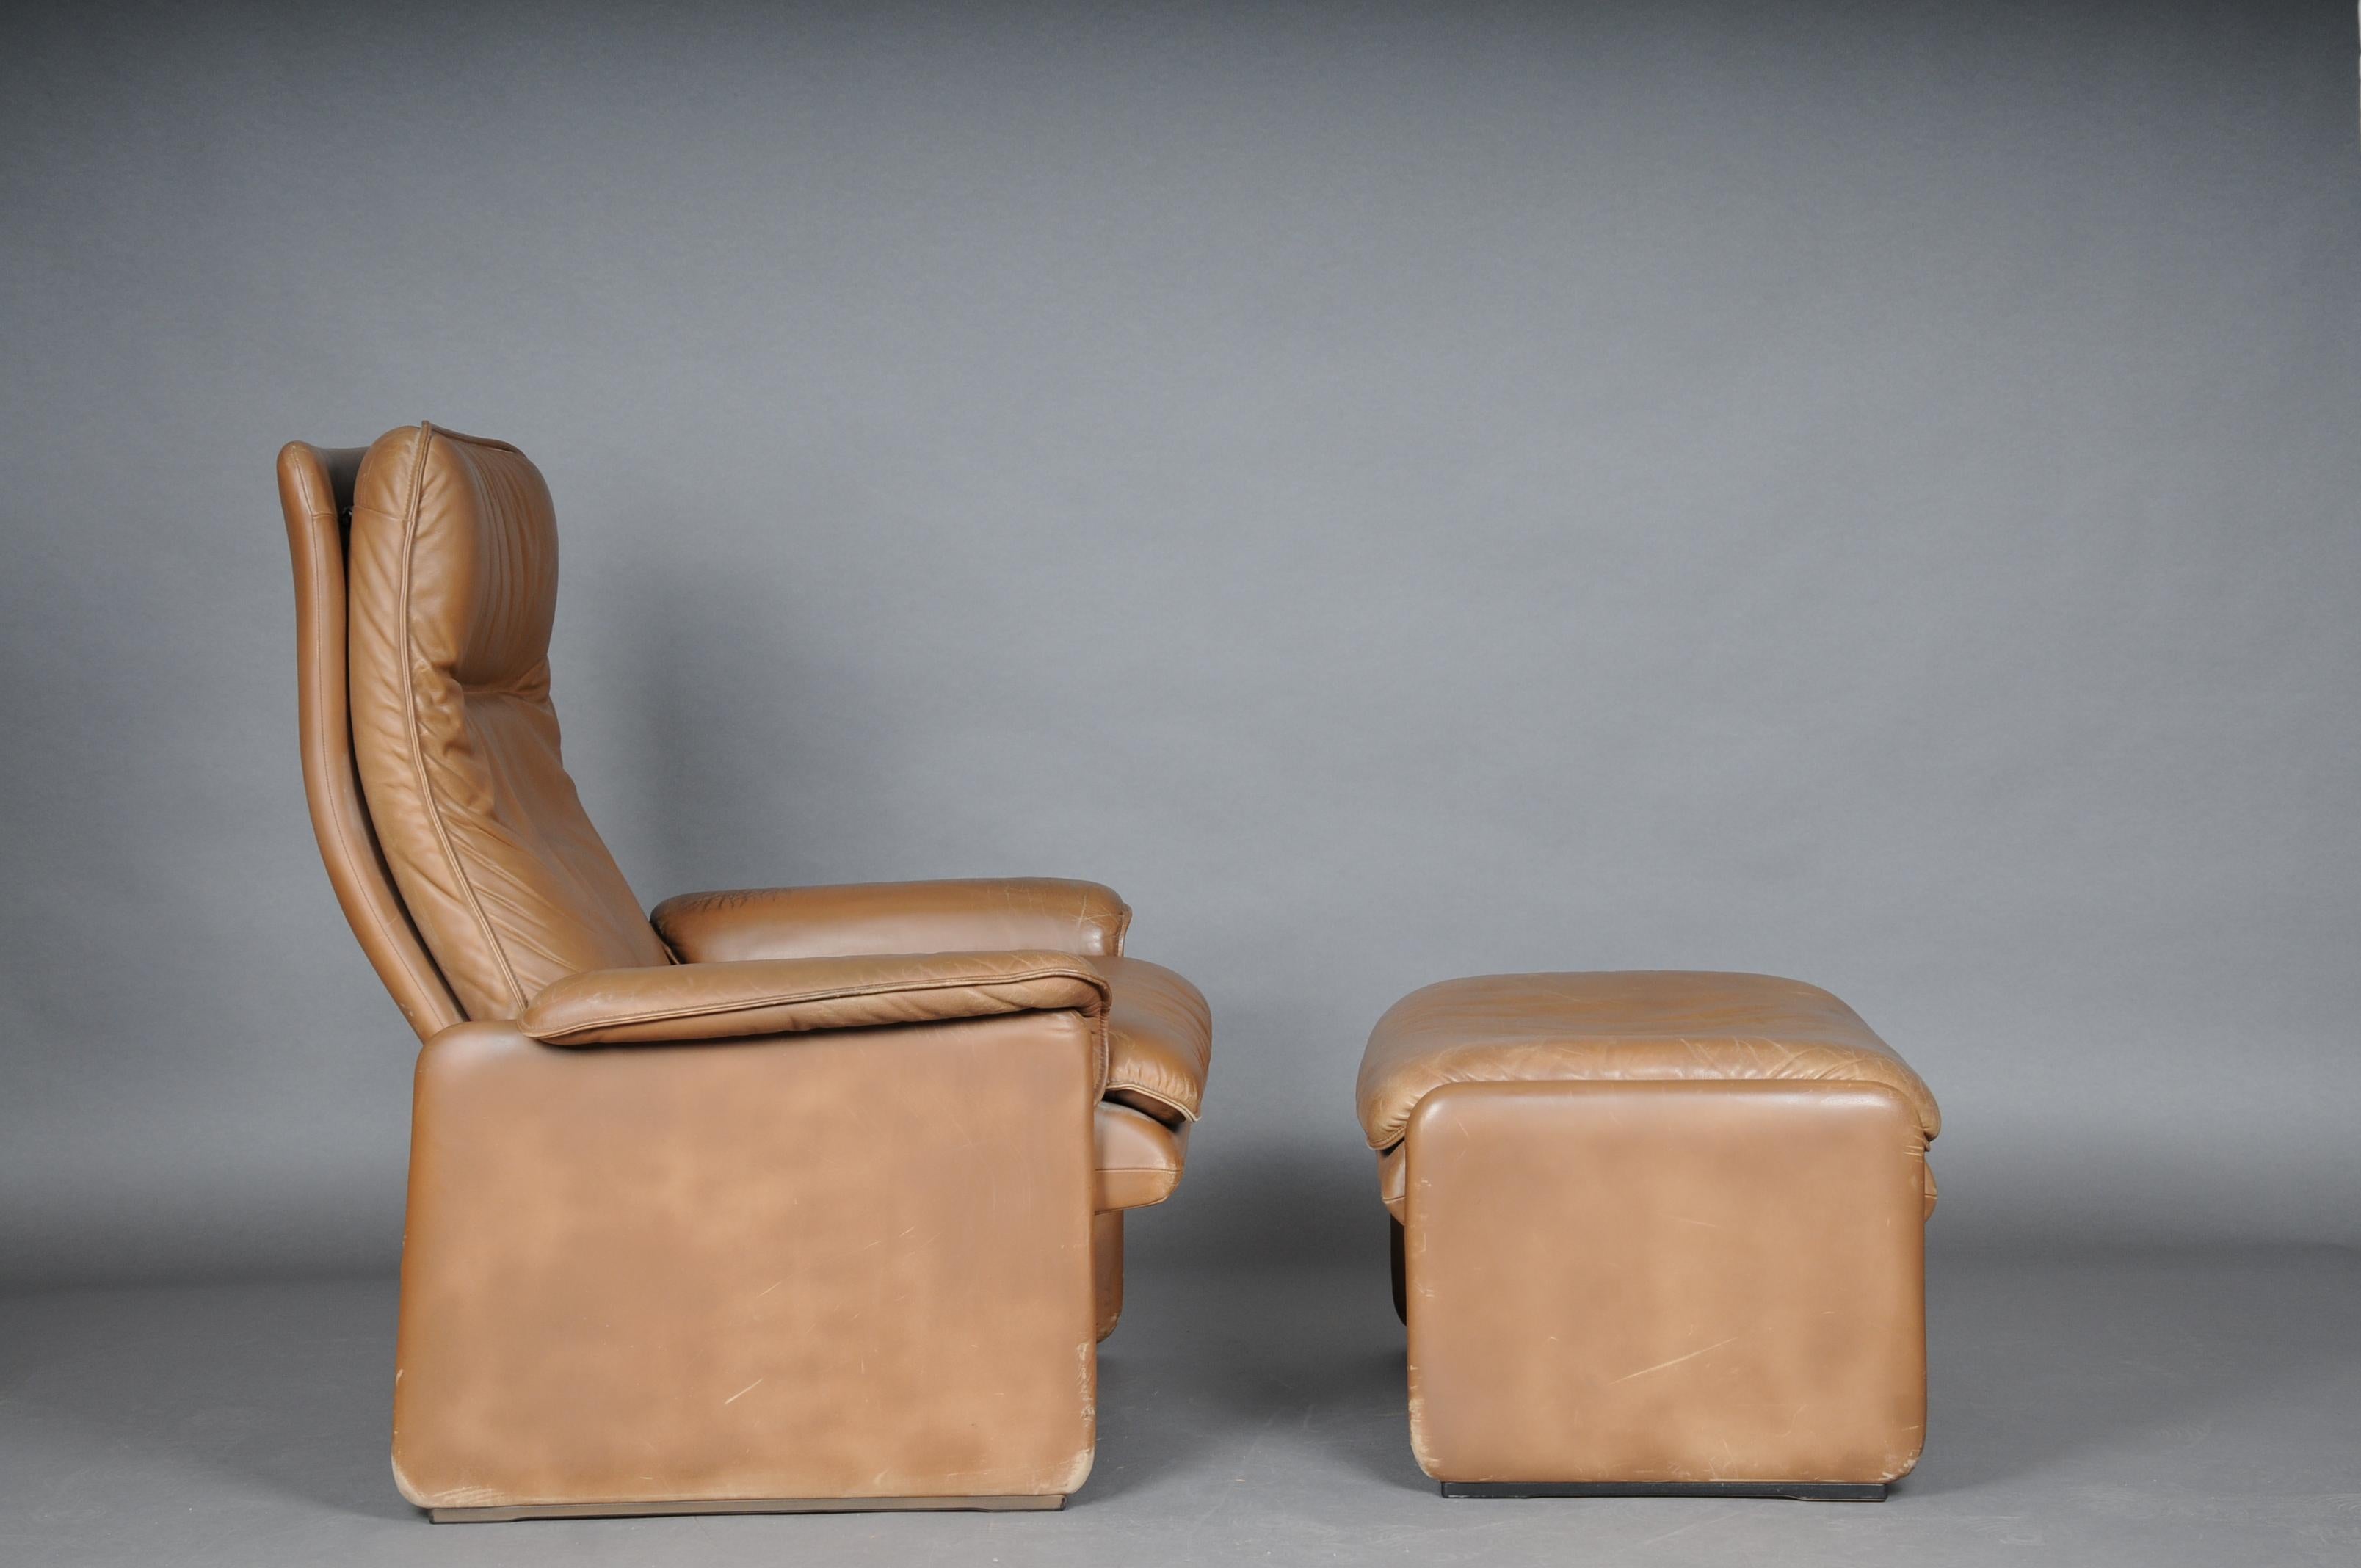 Exclusive designer classic. De Sede stands for absolutely high quality and handcrafted design classic.

Made in Switzerland.

Lounge chair with ottoman. brown/beige, high quality leather.
This set is a classic that fits in any style-conscious